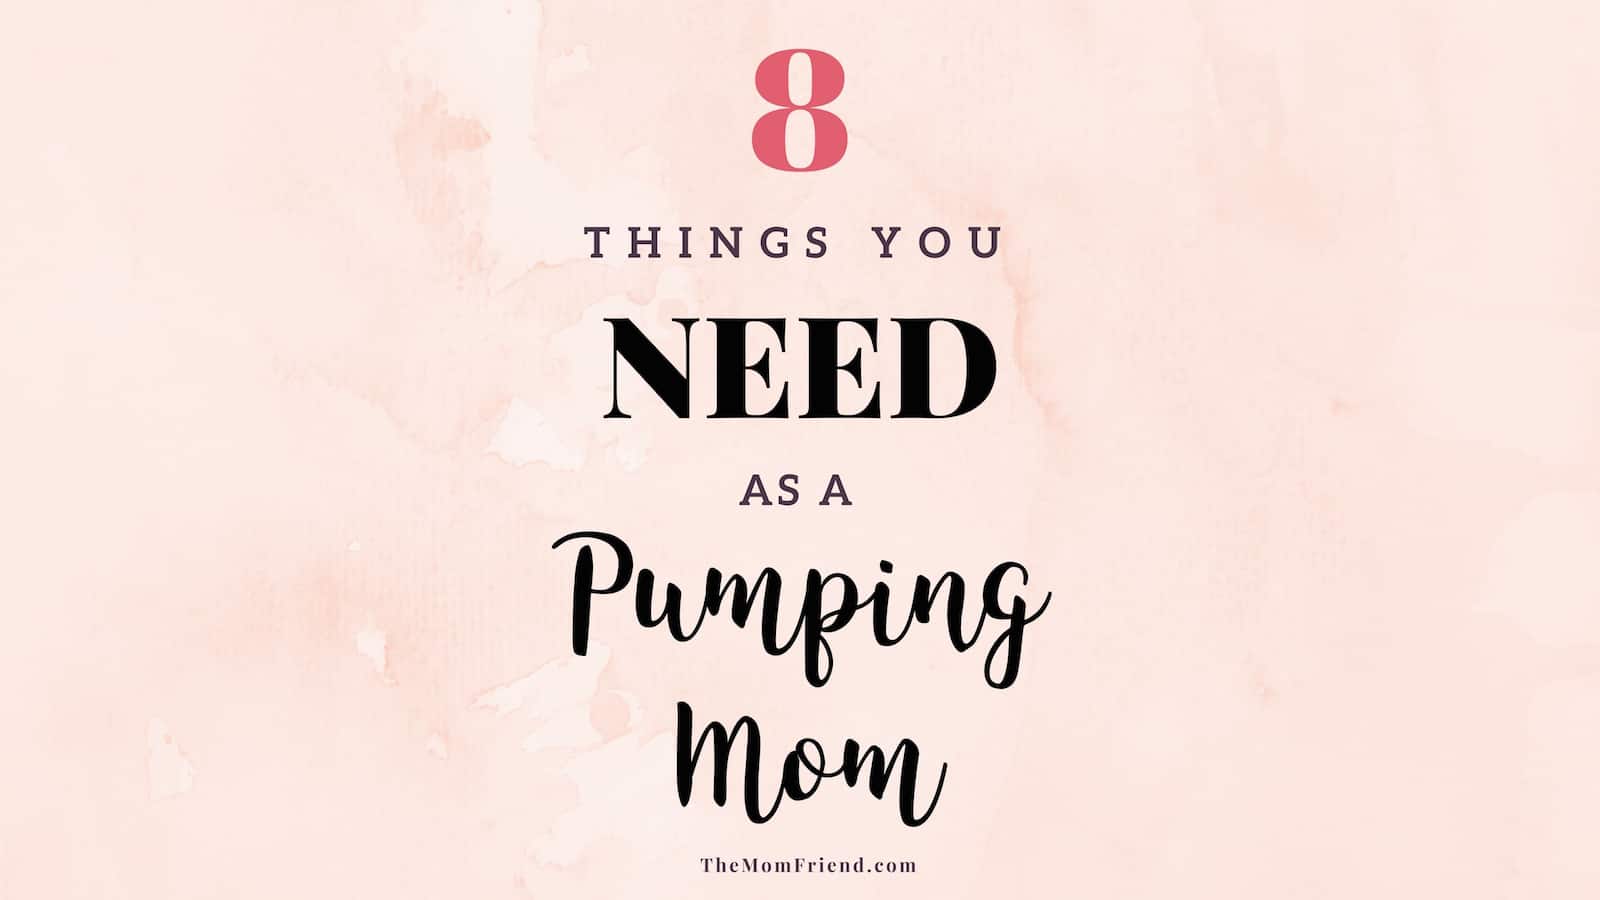 Image graphic of 8 Things You Need as Pumping Mom.